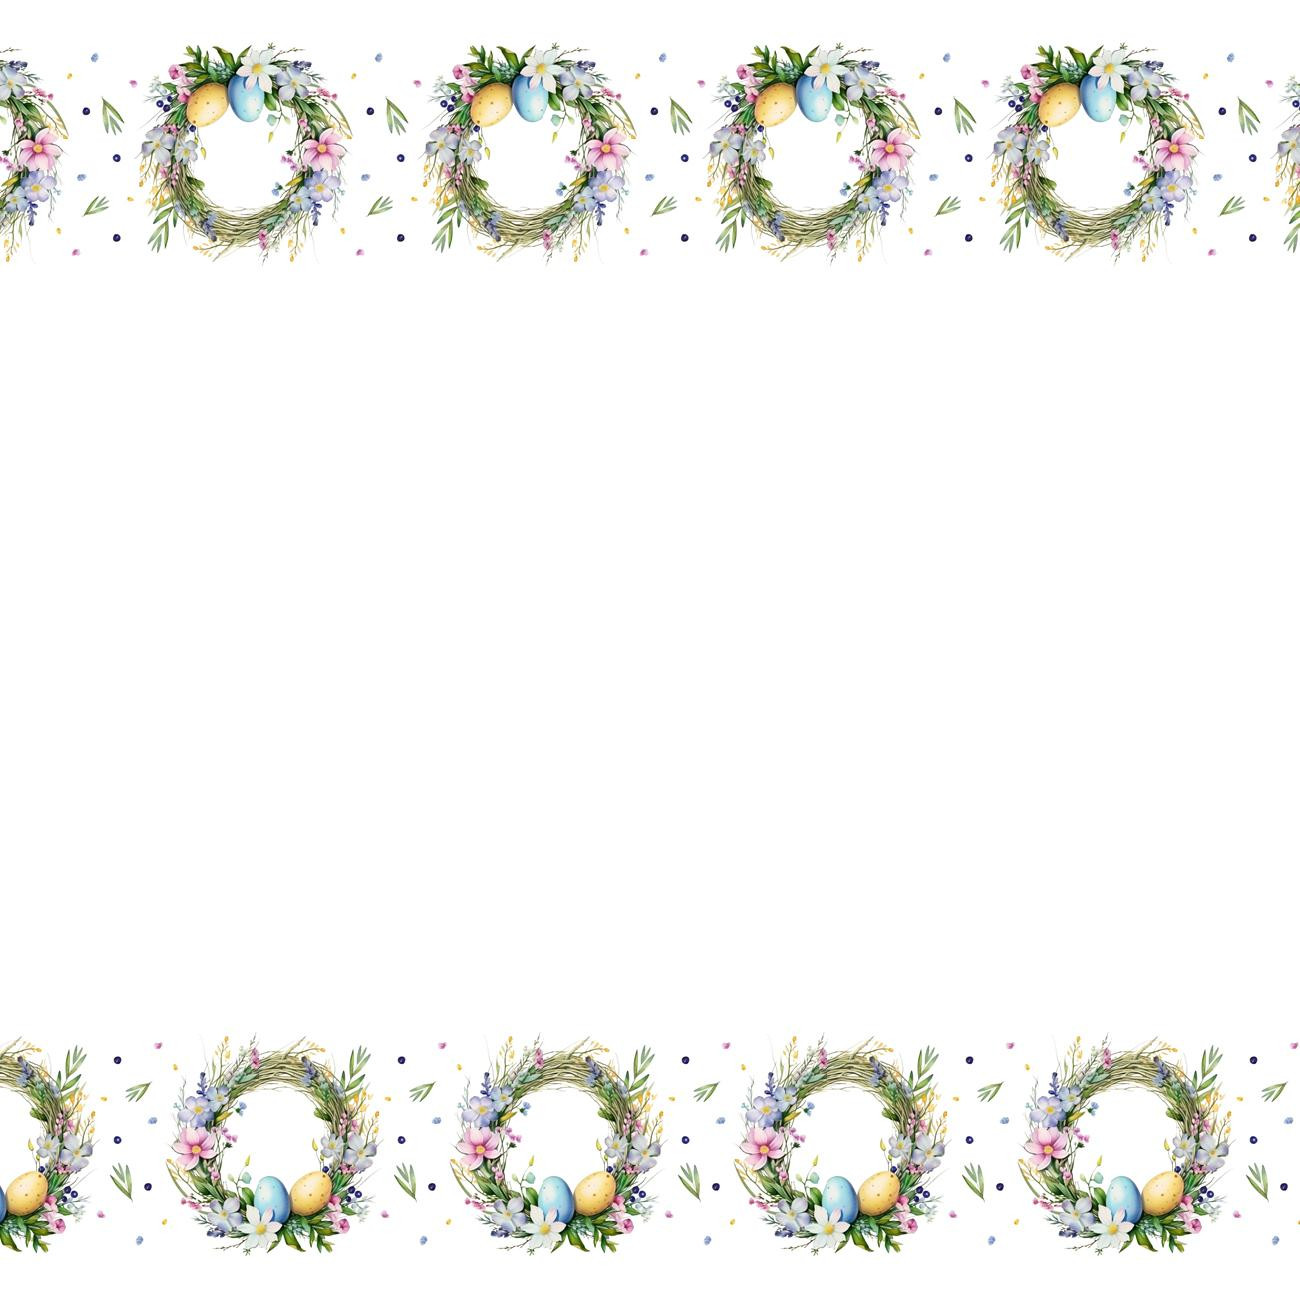 EASTER WREATH PAT. 1 - Woven Fabric for tablecloths